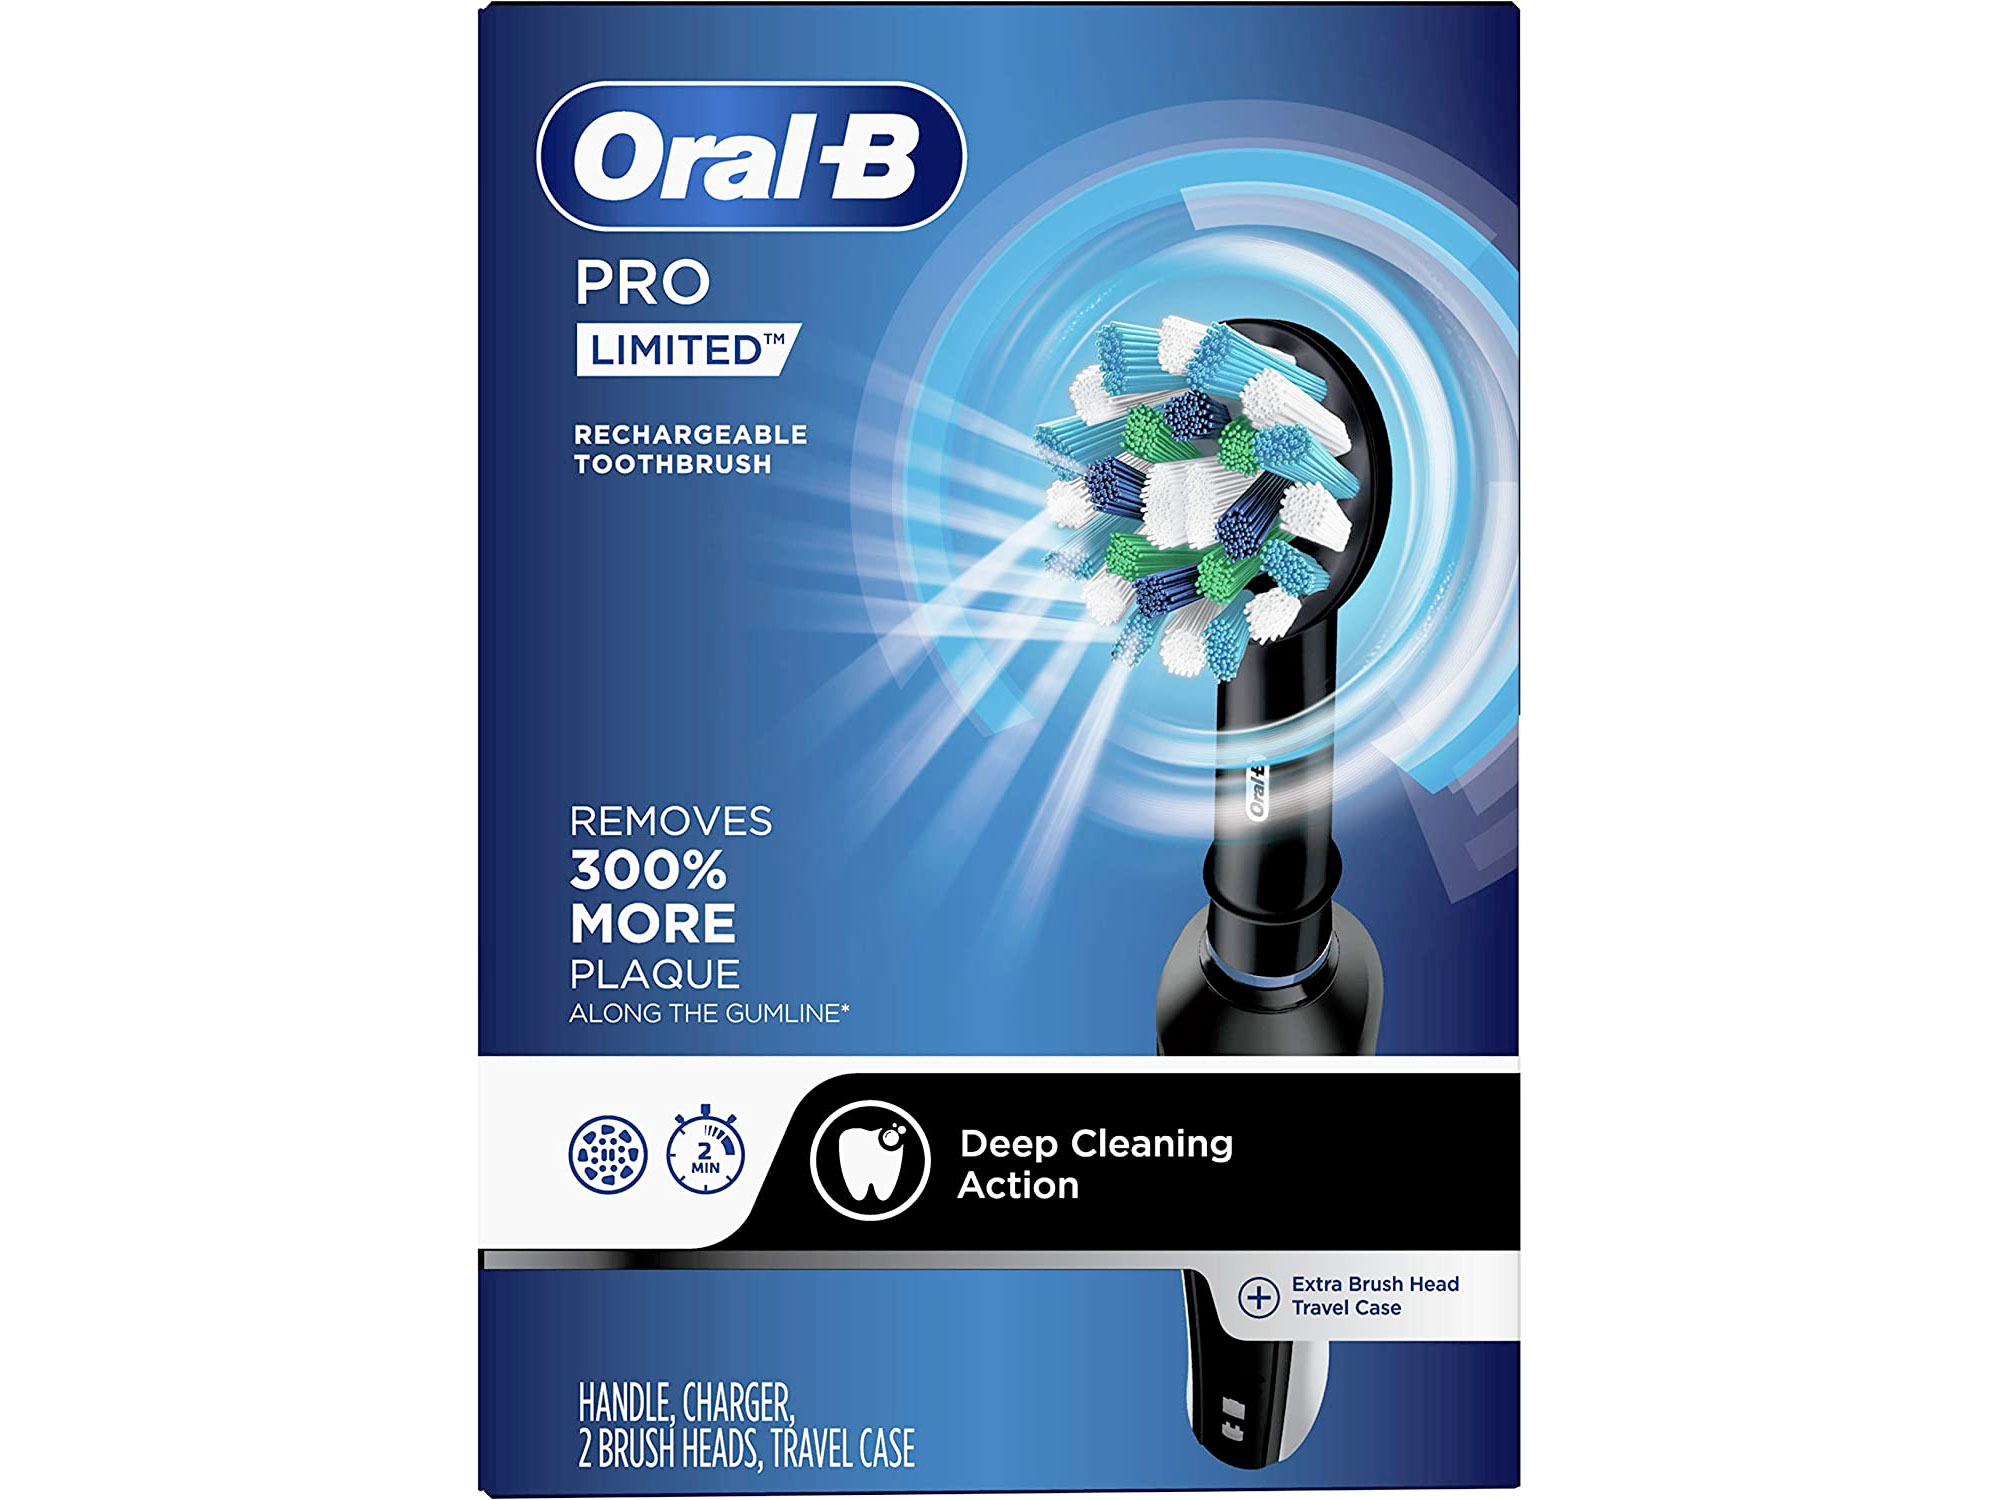 Amazon：Oral-B Pro Limited Rechargeable Electric Toothbrush只賣$59.99(只限Prime會員)